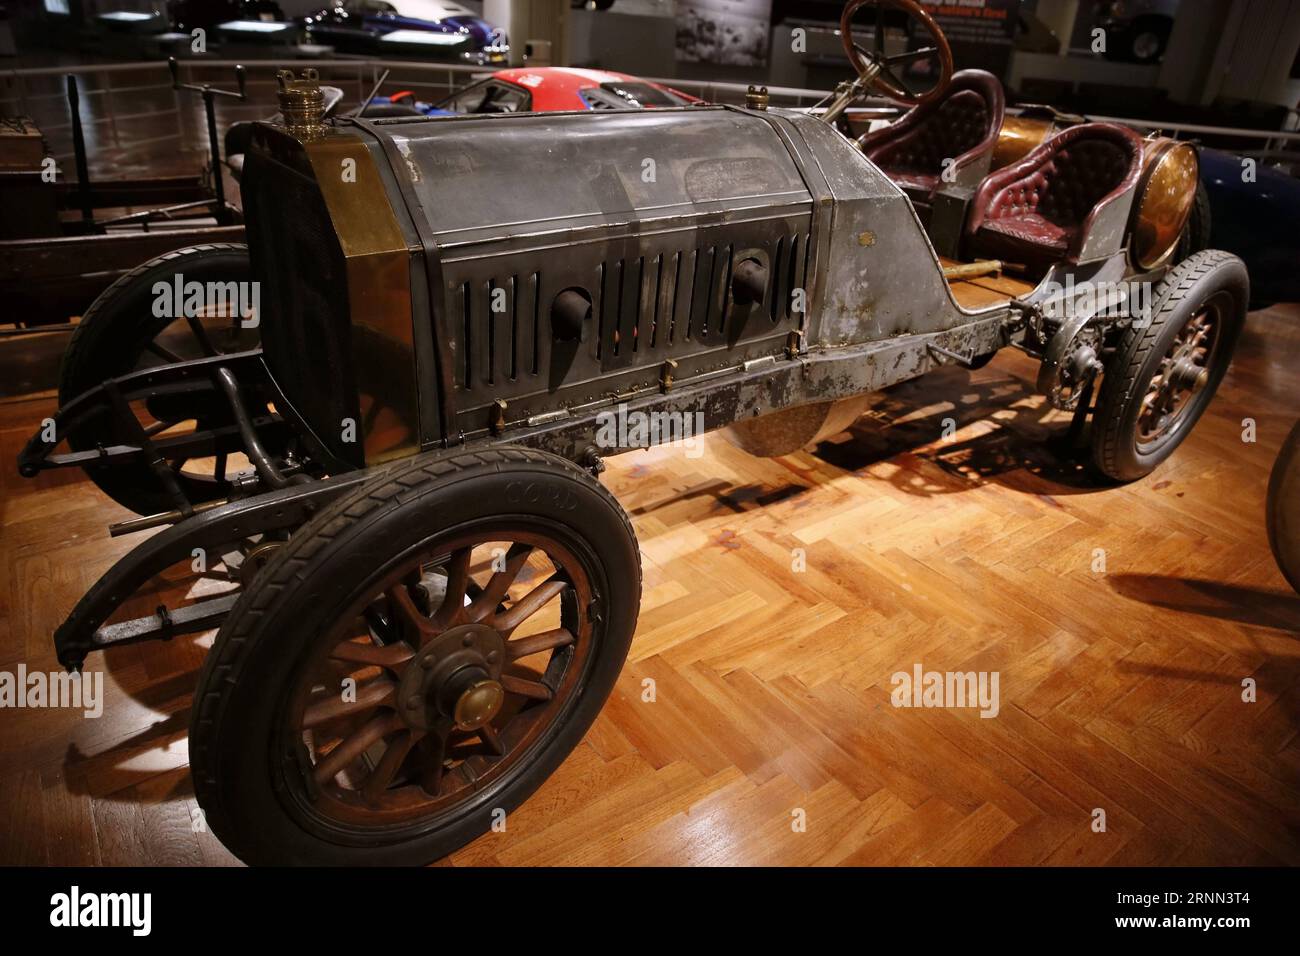 (170623) -- DETROIT, June 23, 2017 -- Photo taken on June 22, 2017 shows a 1906 Locomobile Old 16 road racing displayed at the Henry Ford Museum of American Innovation, in Detroit, the United States. Wang Ping) (dtf) U.S.-DETROIT-HENRY FORD MUSEUM wangping PUBLICATIONxNOTxINxCHN   Detroit June 23 2017 Photo Taken ON June 22 2017 Shows a 1906 Steam engine Old 16 Road Racing displayed AT The Henry Ford Museum of American Innovation in Detroit The United States Wang Ping dtf U S Detroit Henry Ford Museum Wangping PUBLICATIONxNOTxINxCHN Stock Photo